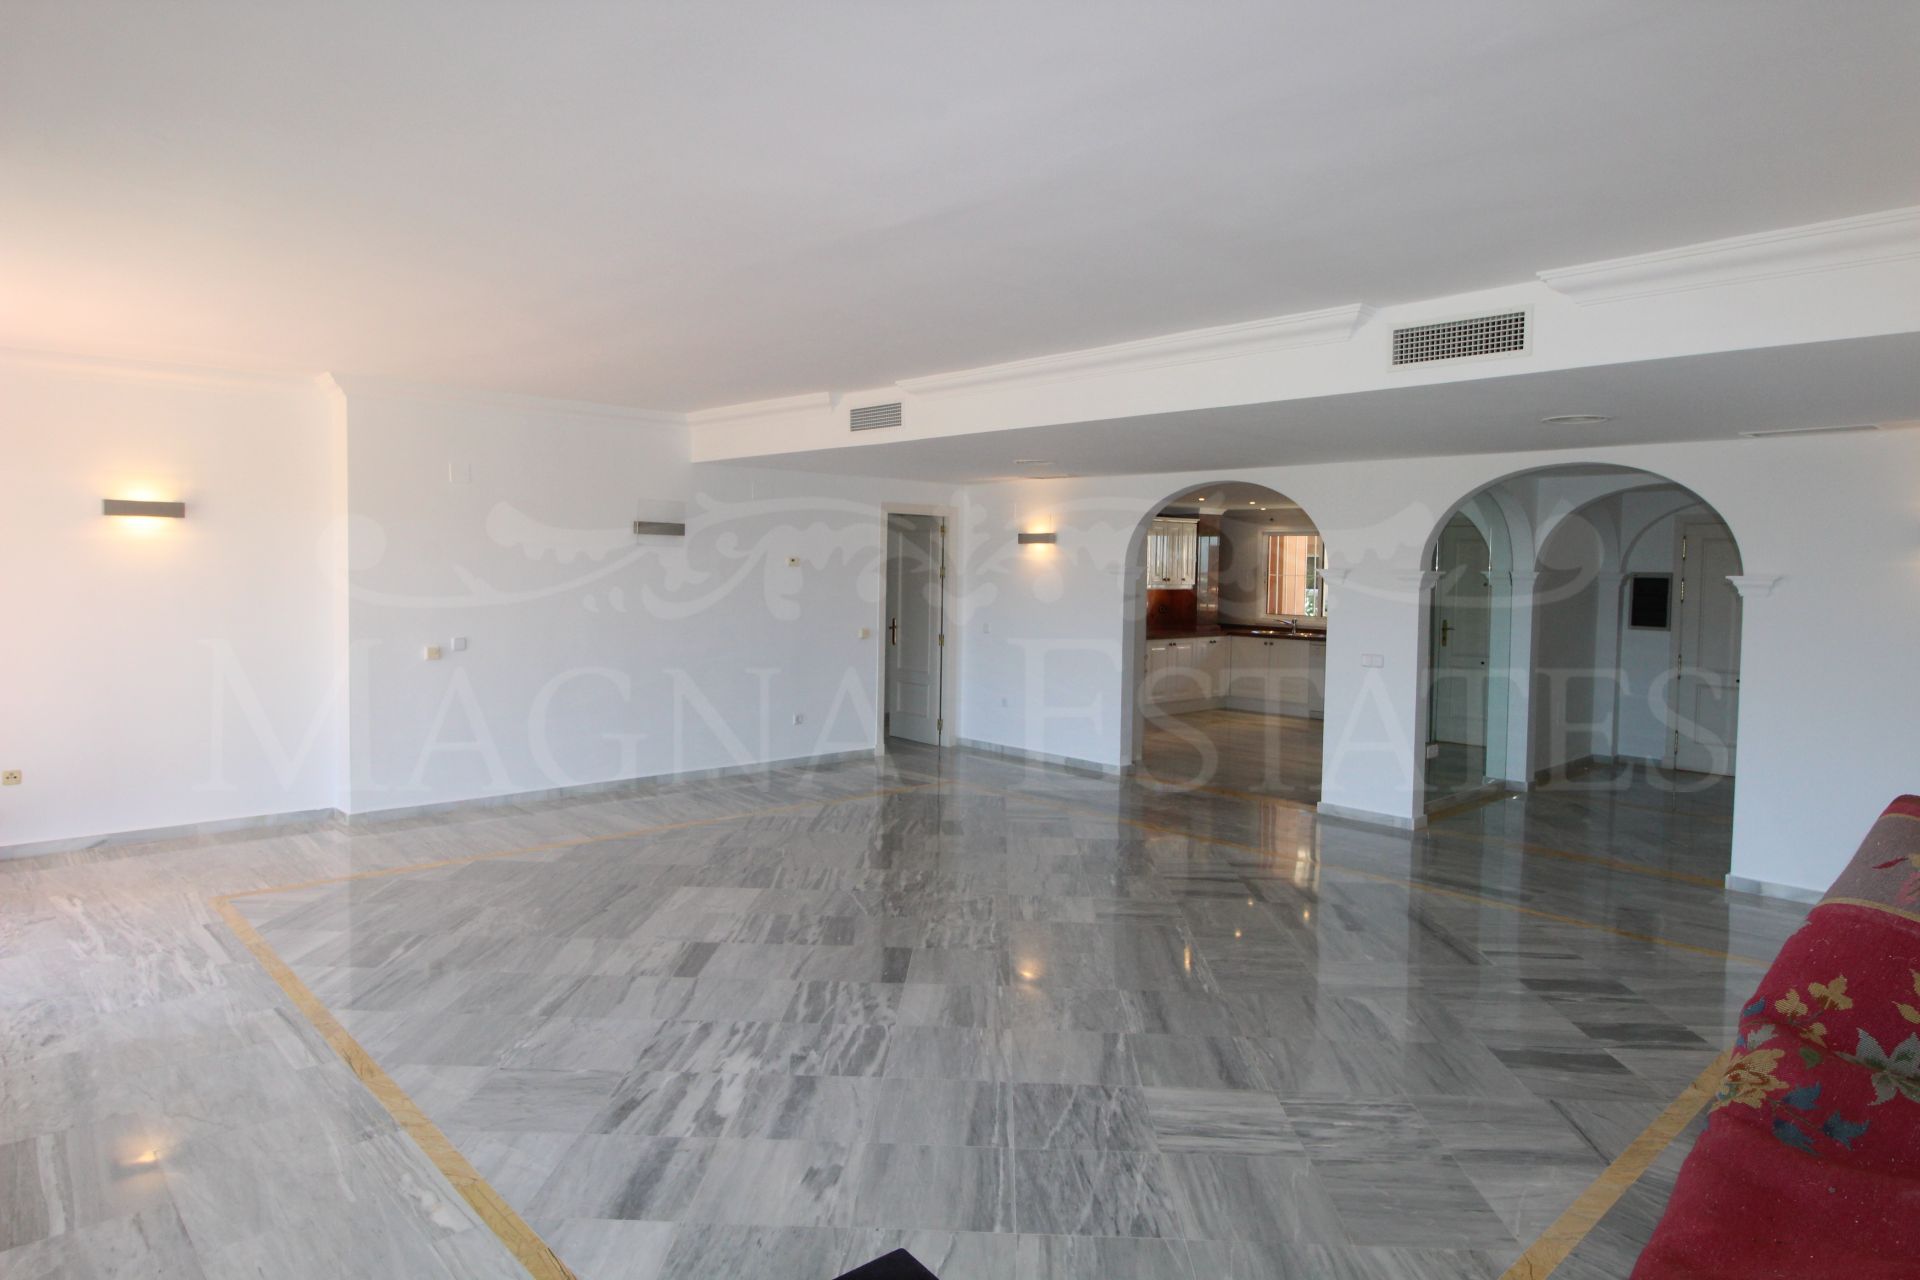 Large 4-bedroom apartment with sea and mountain views in Magna Marbella